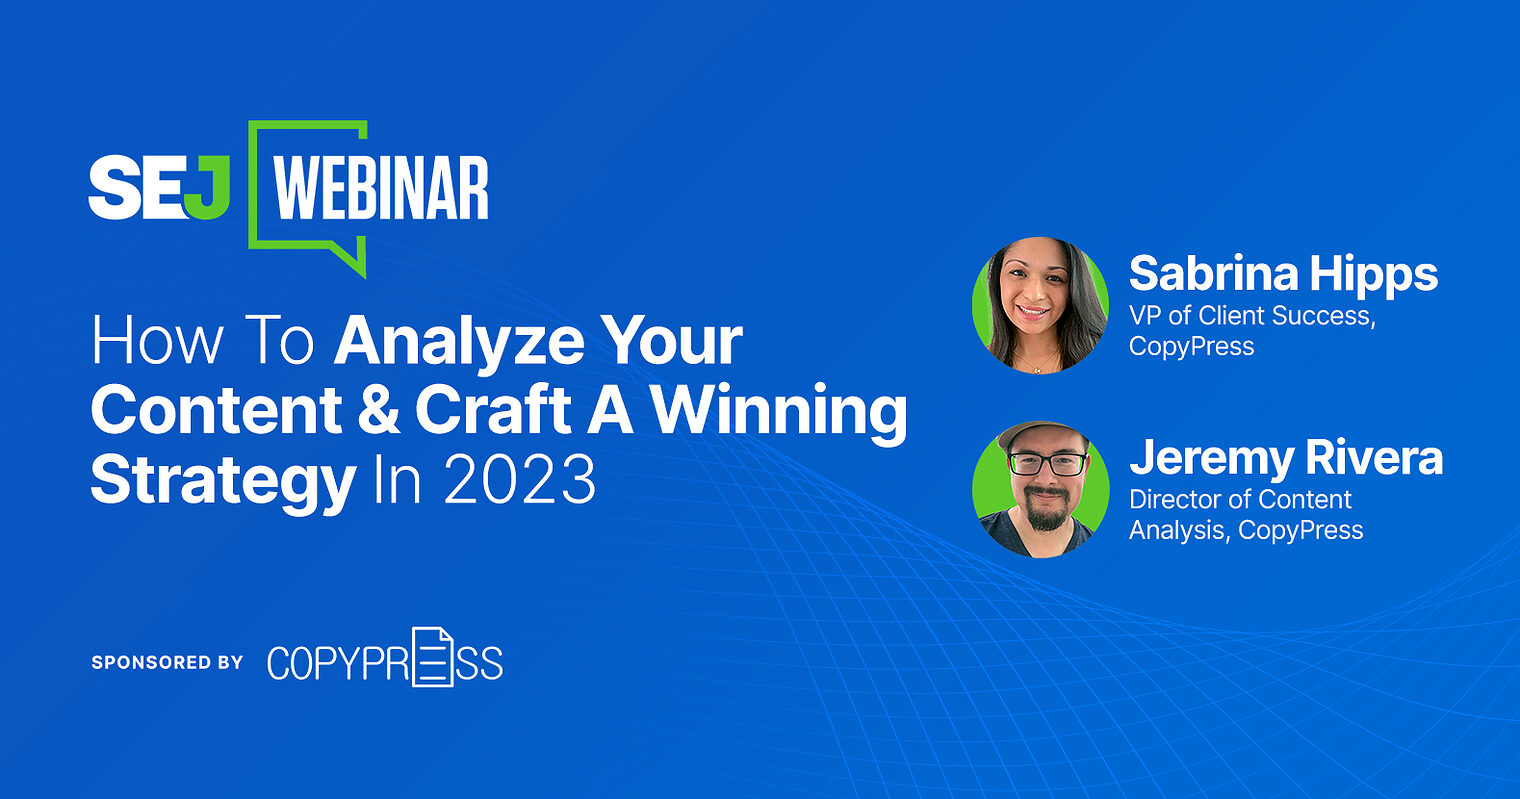 Content Strategy: How To Win With Better Content In 2023 [Webinar]